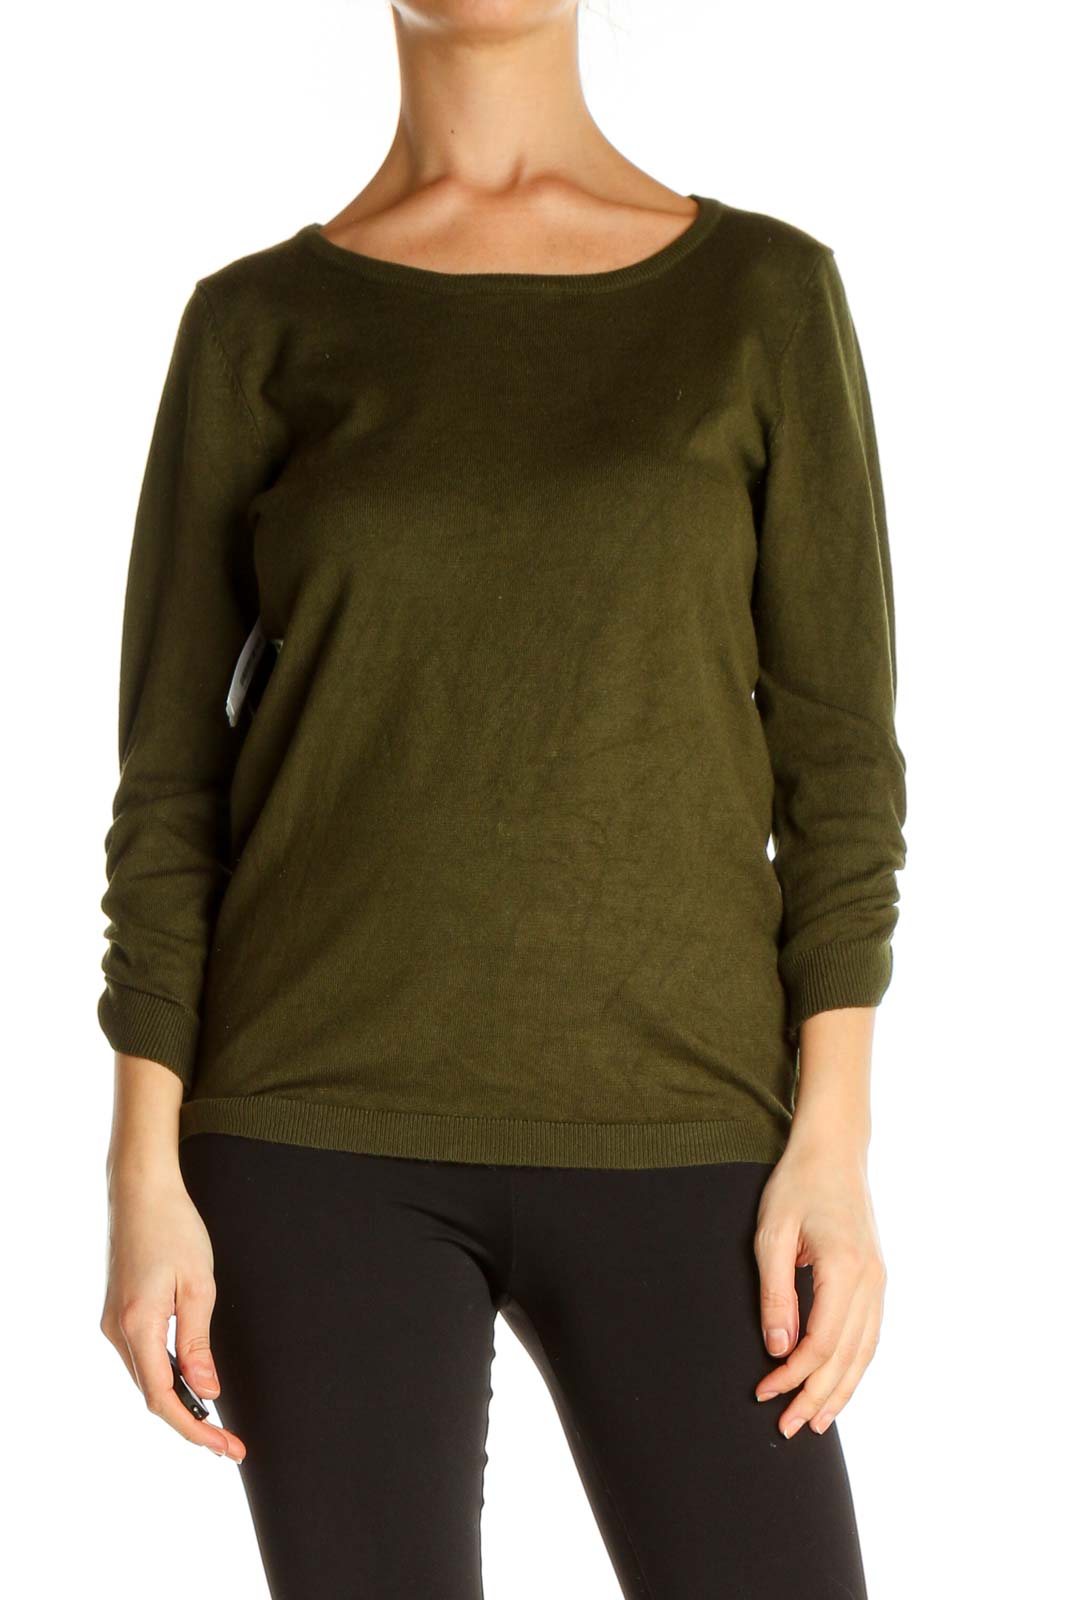 Green Solid All Day Wear Sweater Front